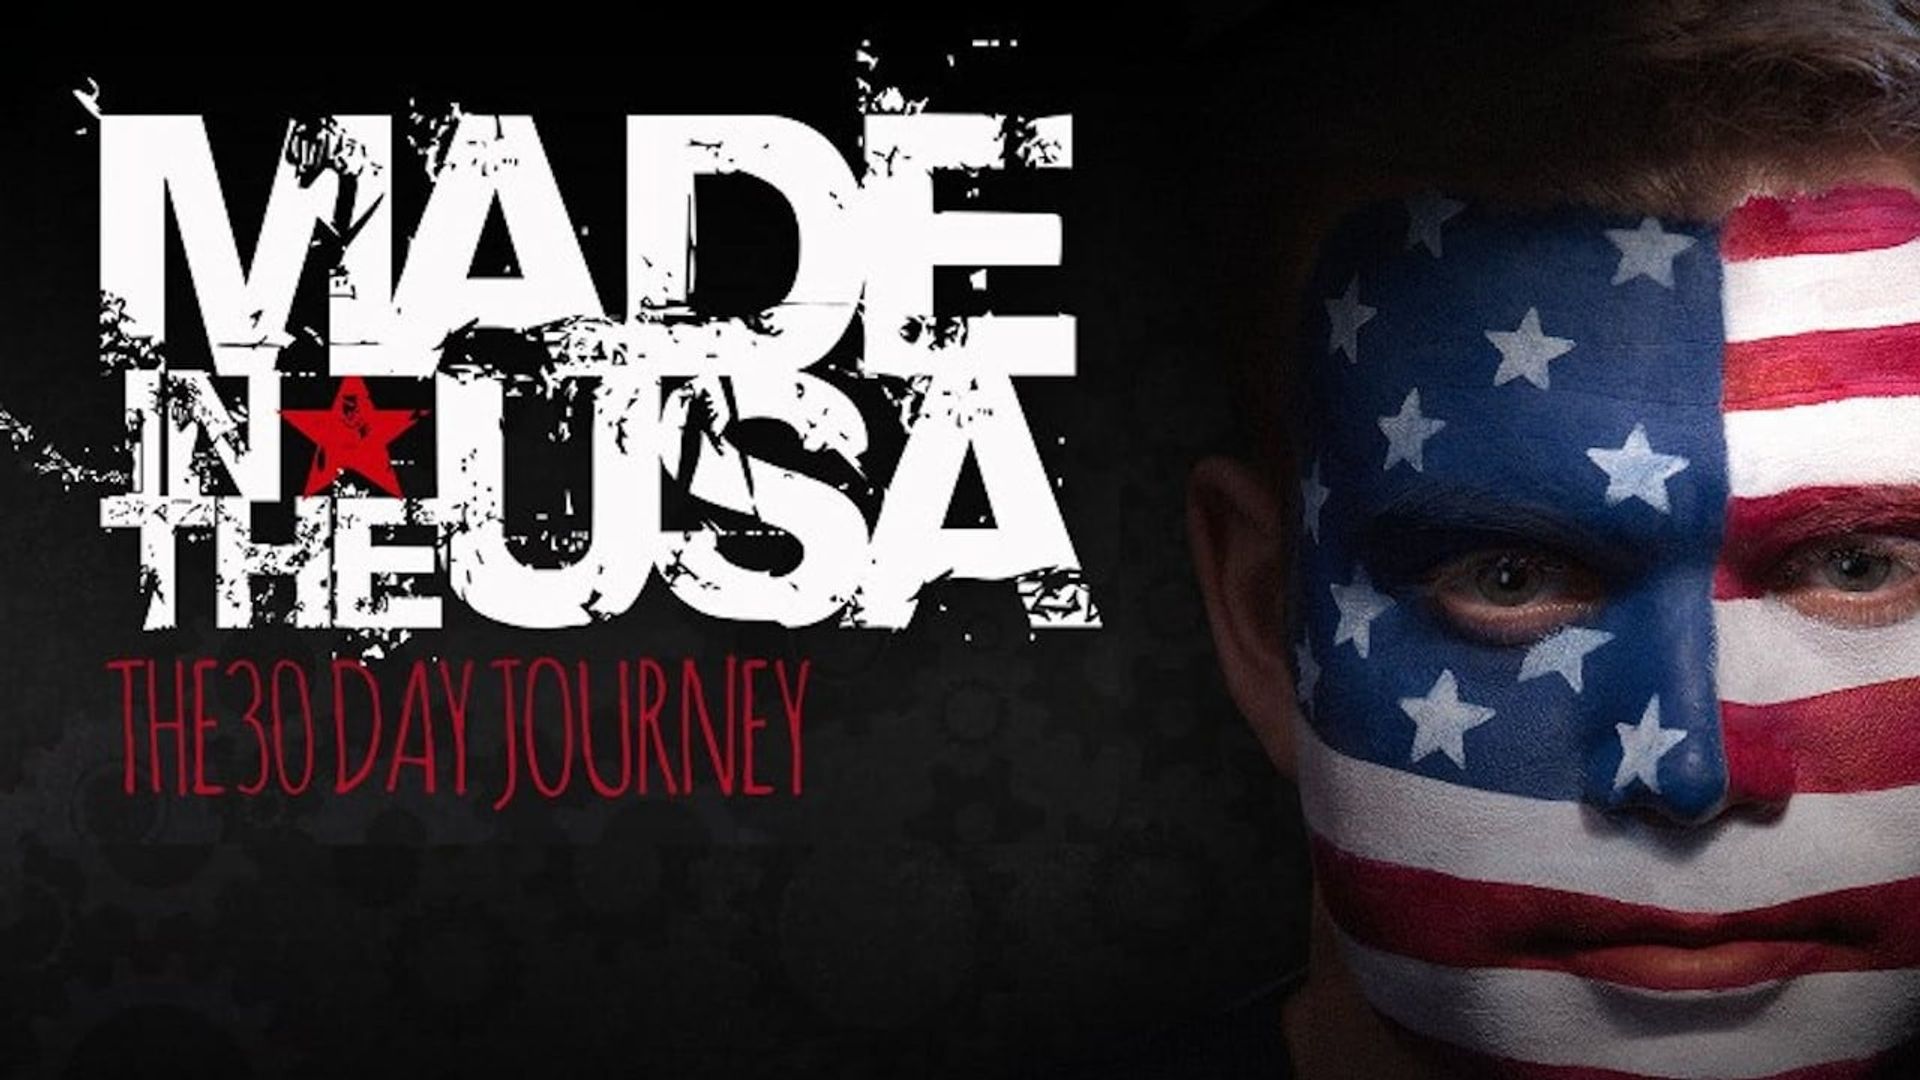 Made in the USA: The 30 Day Journey background